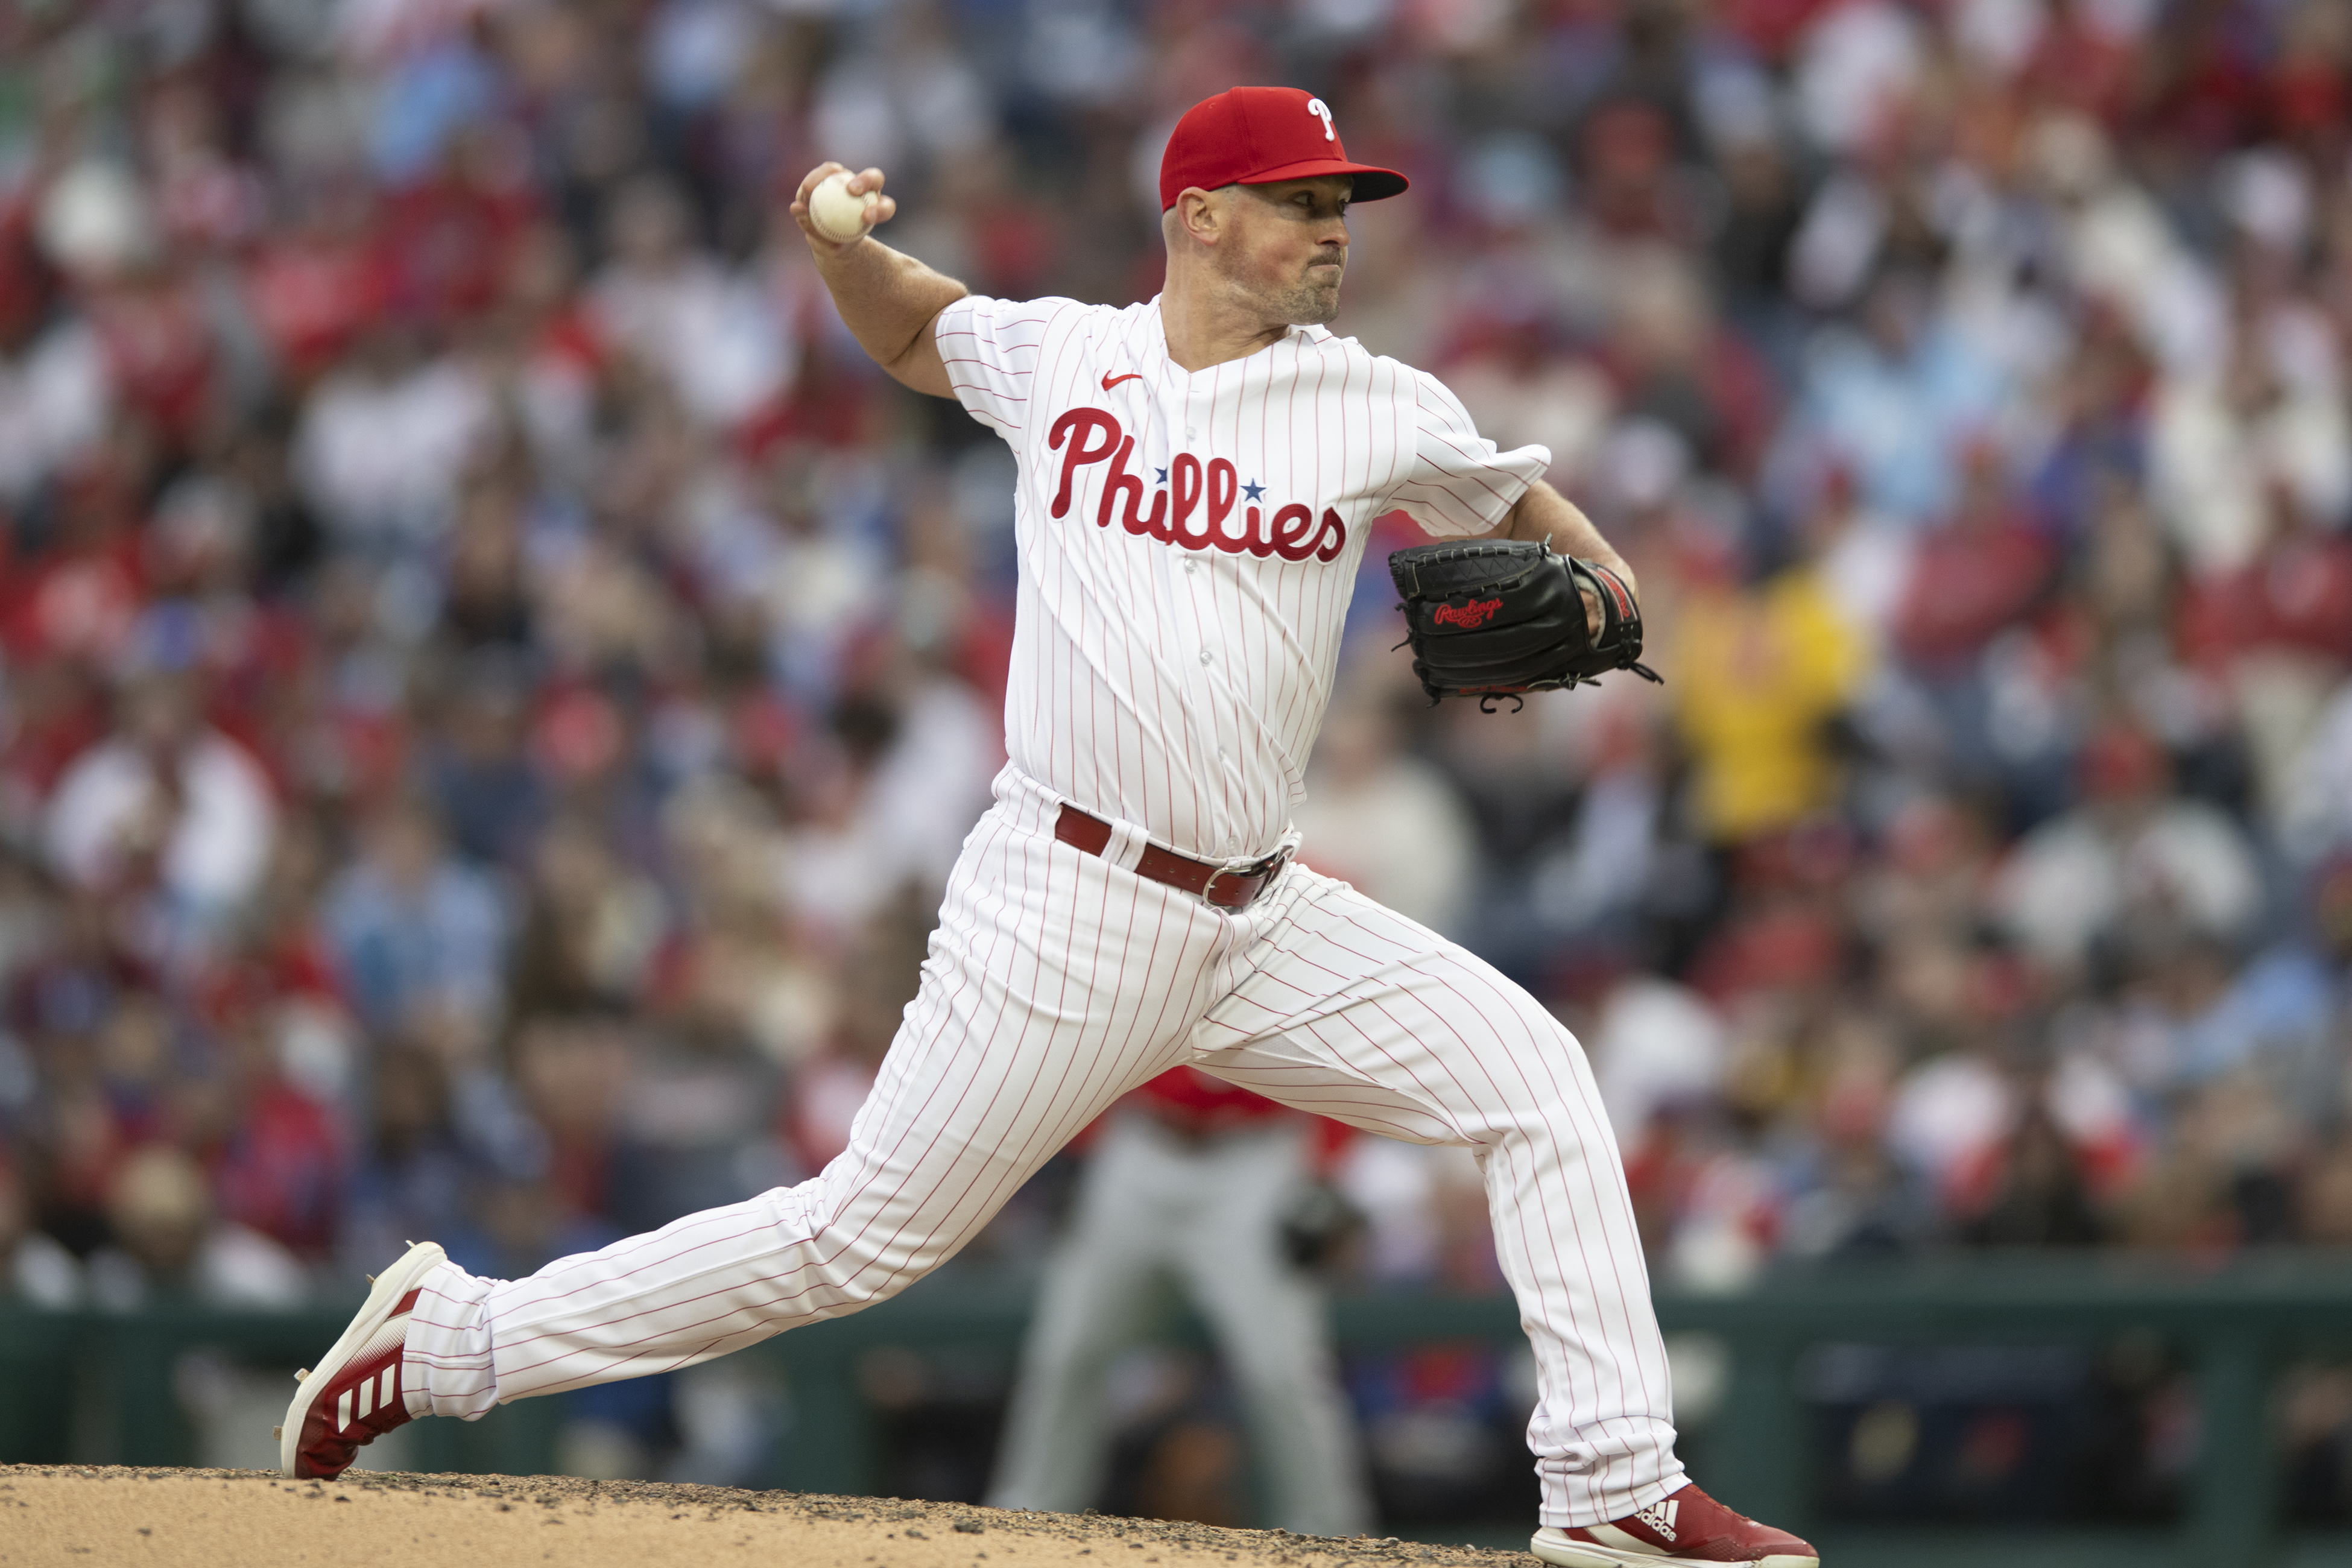 Darick Hall gets the Phillies call he's been waiting for since thumb injury